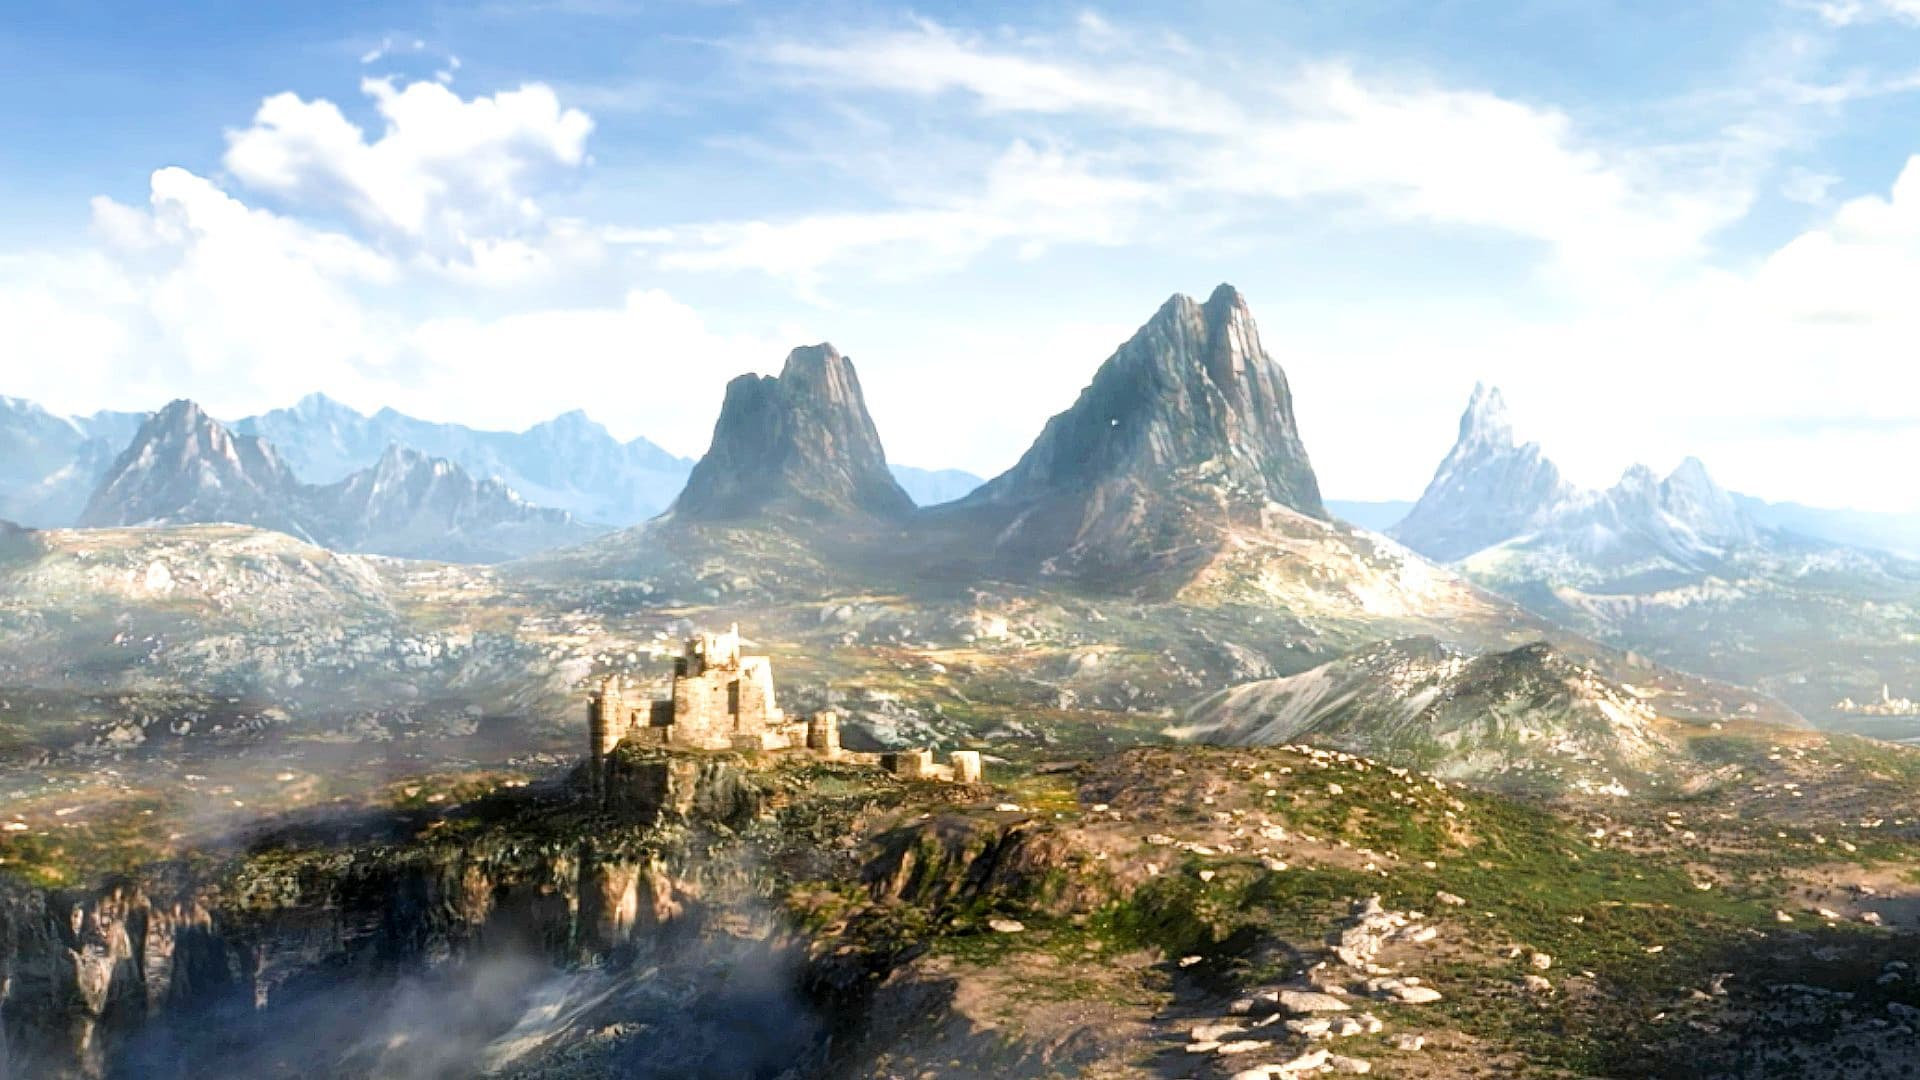 Bethesda is making major changes to its engine ahead of 'The Elder Scrolls 6 